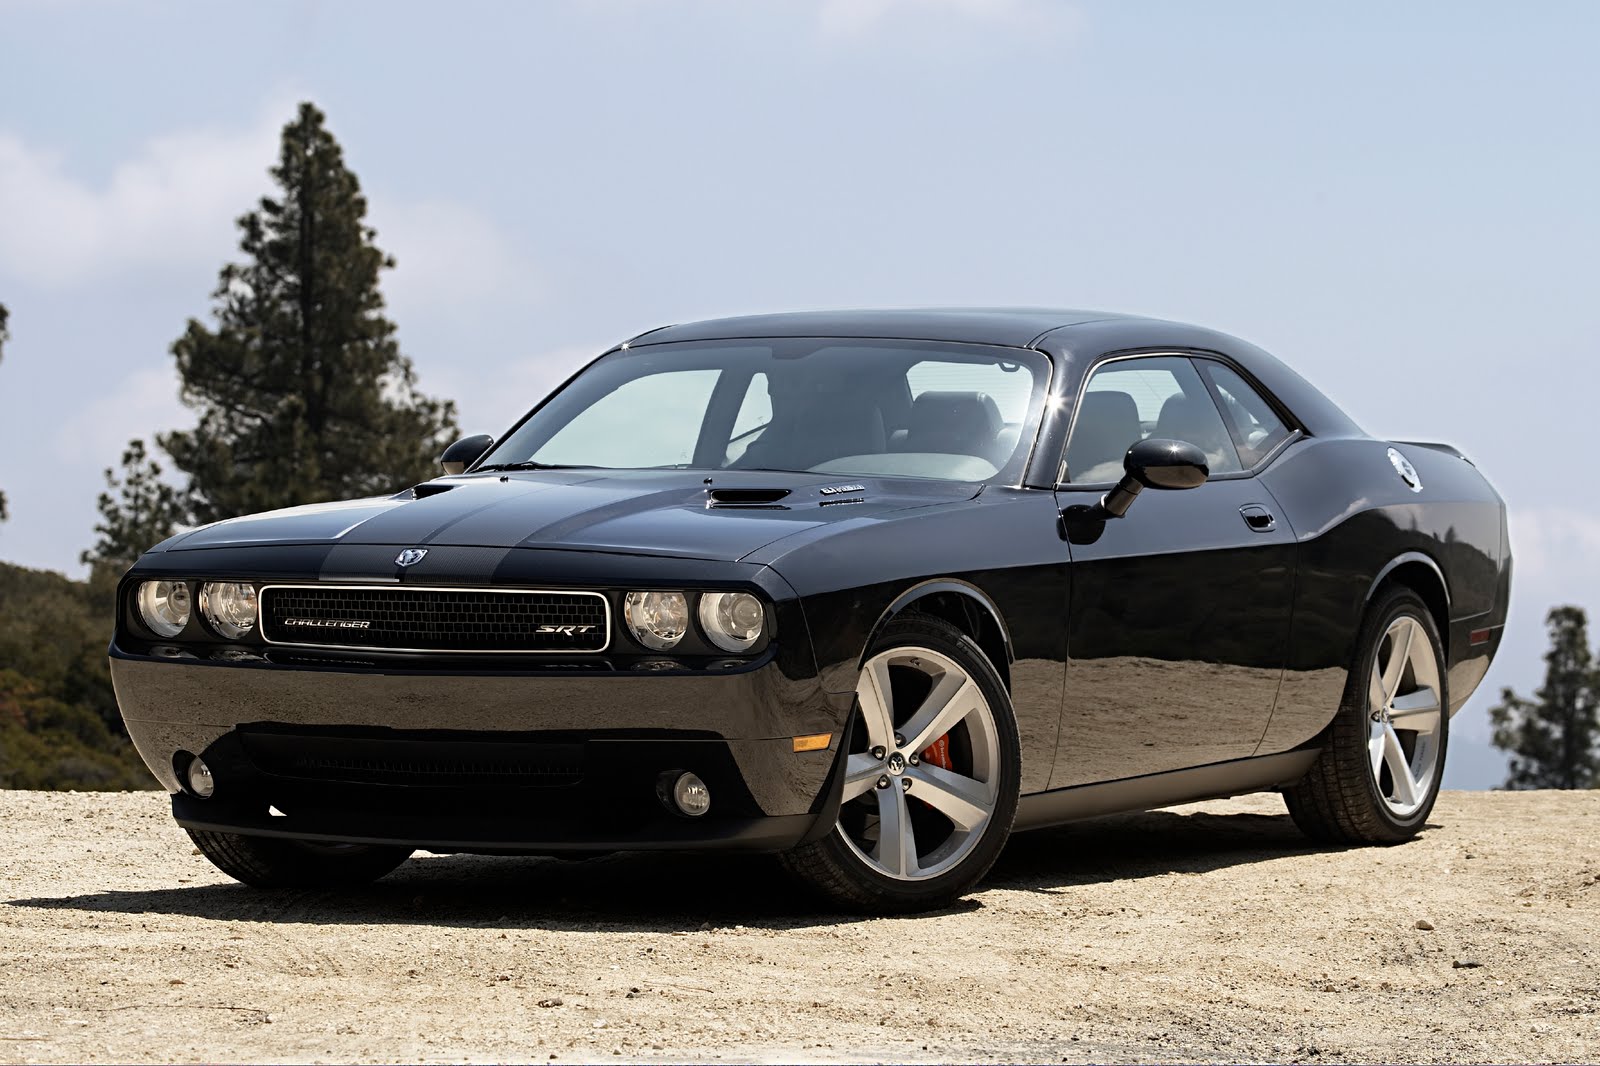 Dodge Challenger HD Wallpaper In For Your